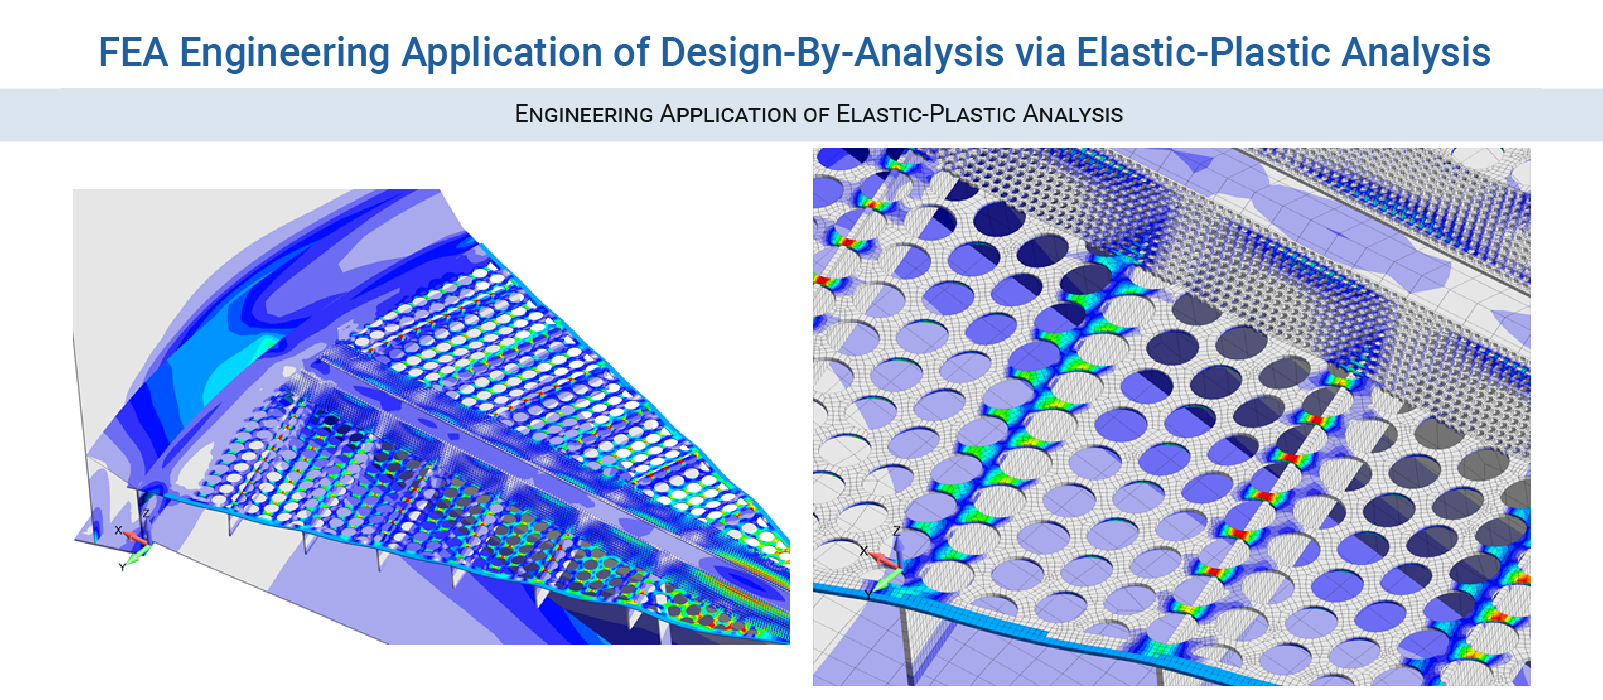 FEA BPVC Consulting Services, Part 5.2 Protection Against Plastic Collapse - Engineering Application of Elastic-Plastic Analysis - FEA ASME Pressure Vessel Engineering Services